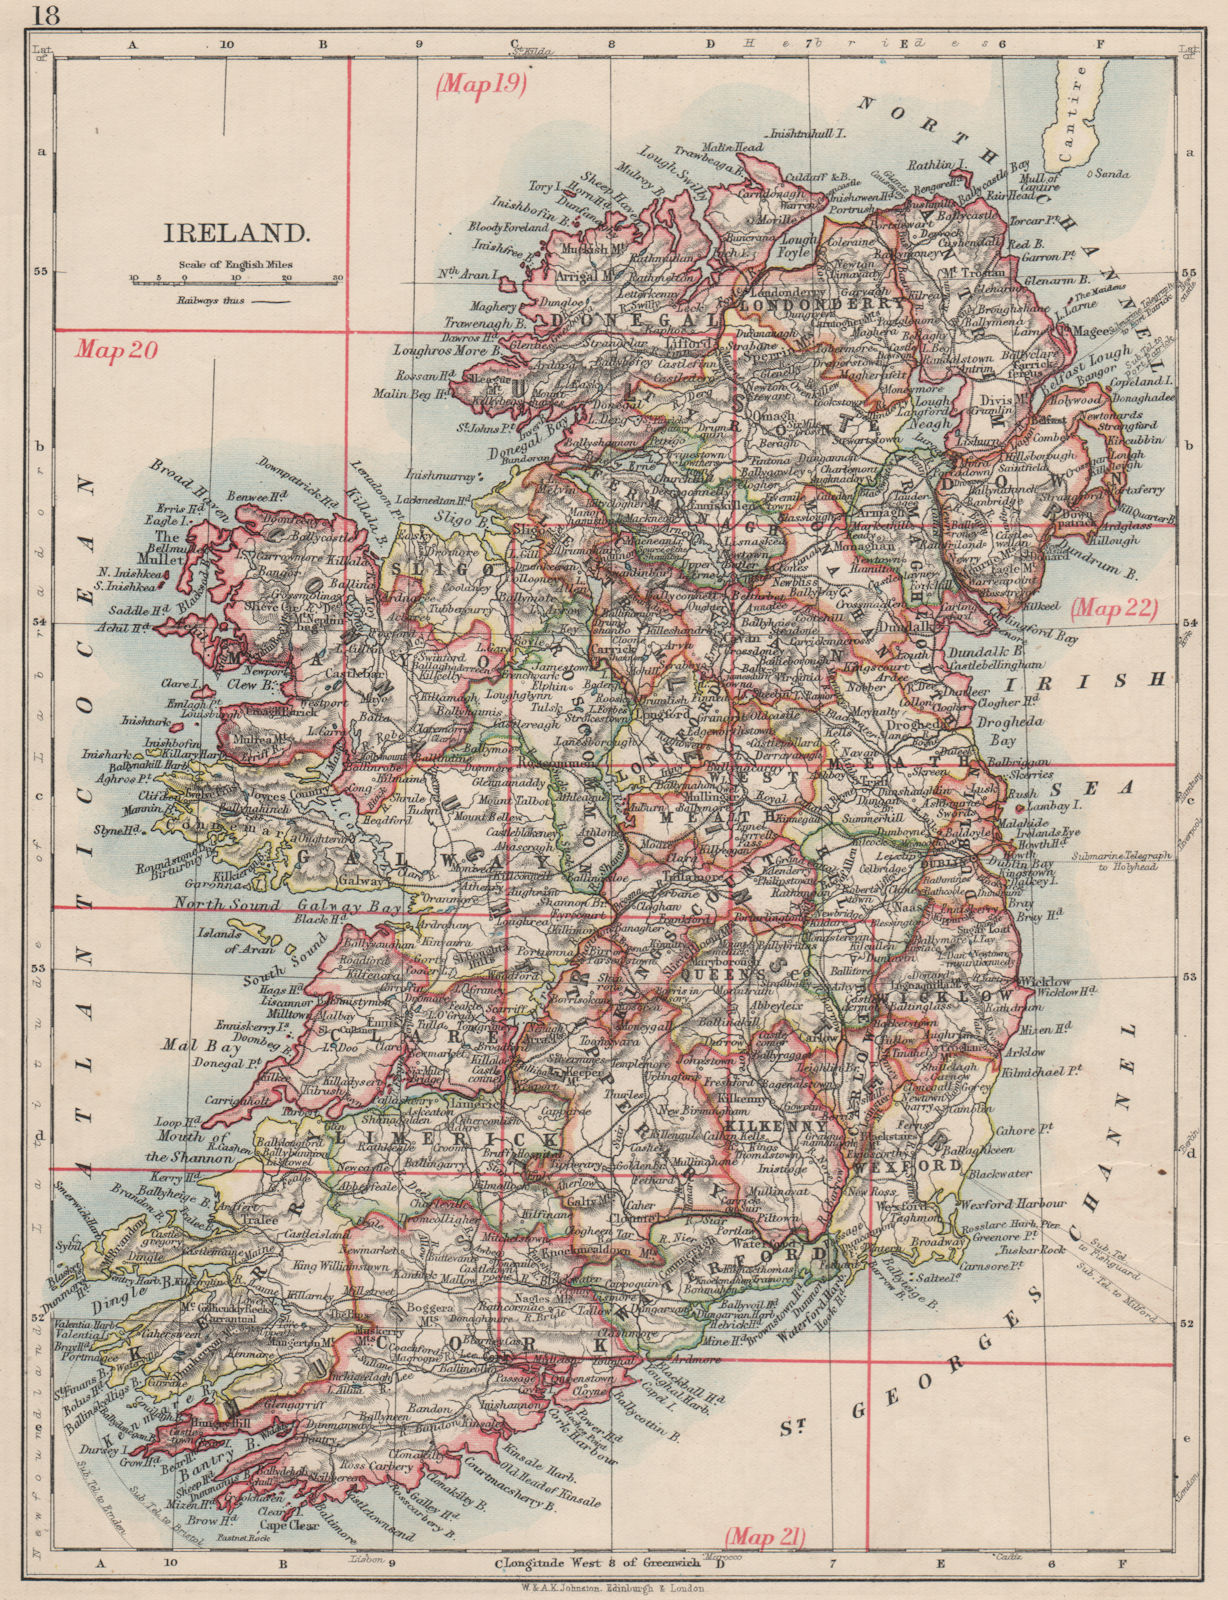 Associate Product IRELAND. Showing counties. Undersea telegraph cables.  JOHNSTON 1900 old map